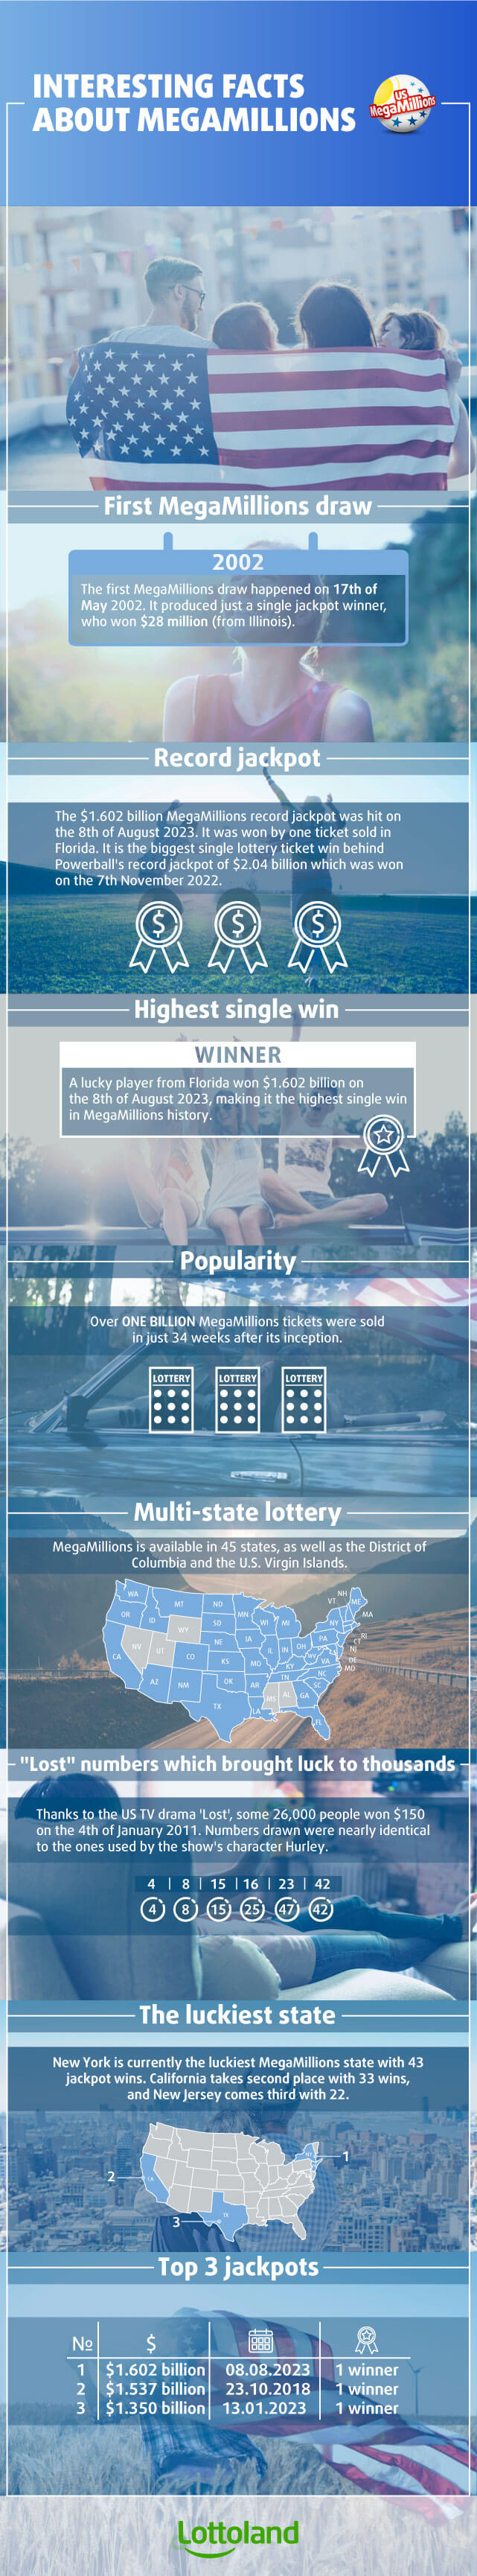 Facts-about-MegaMillions